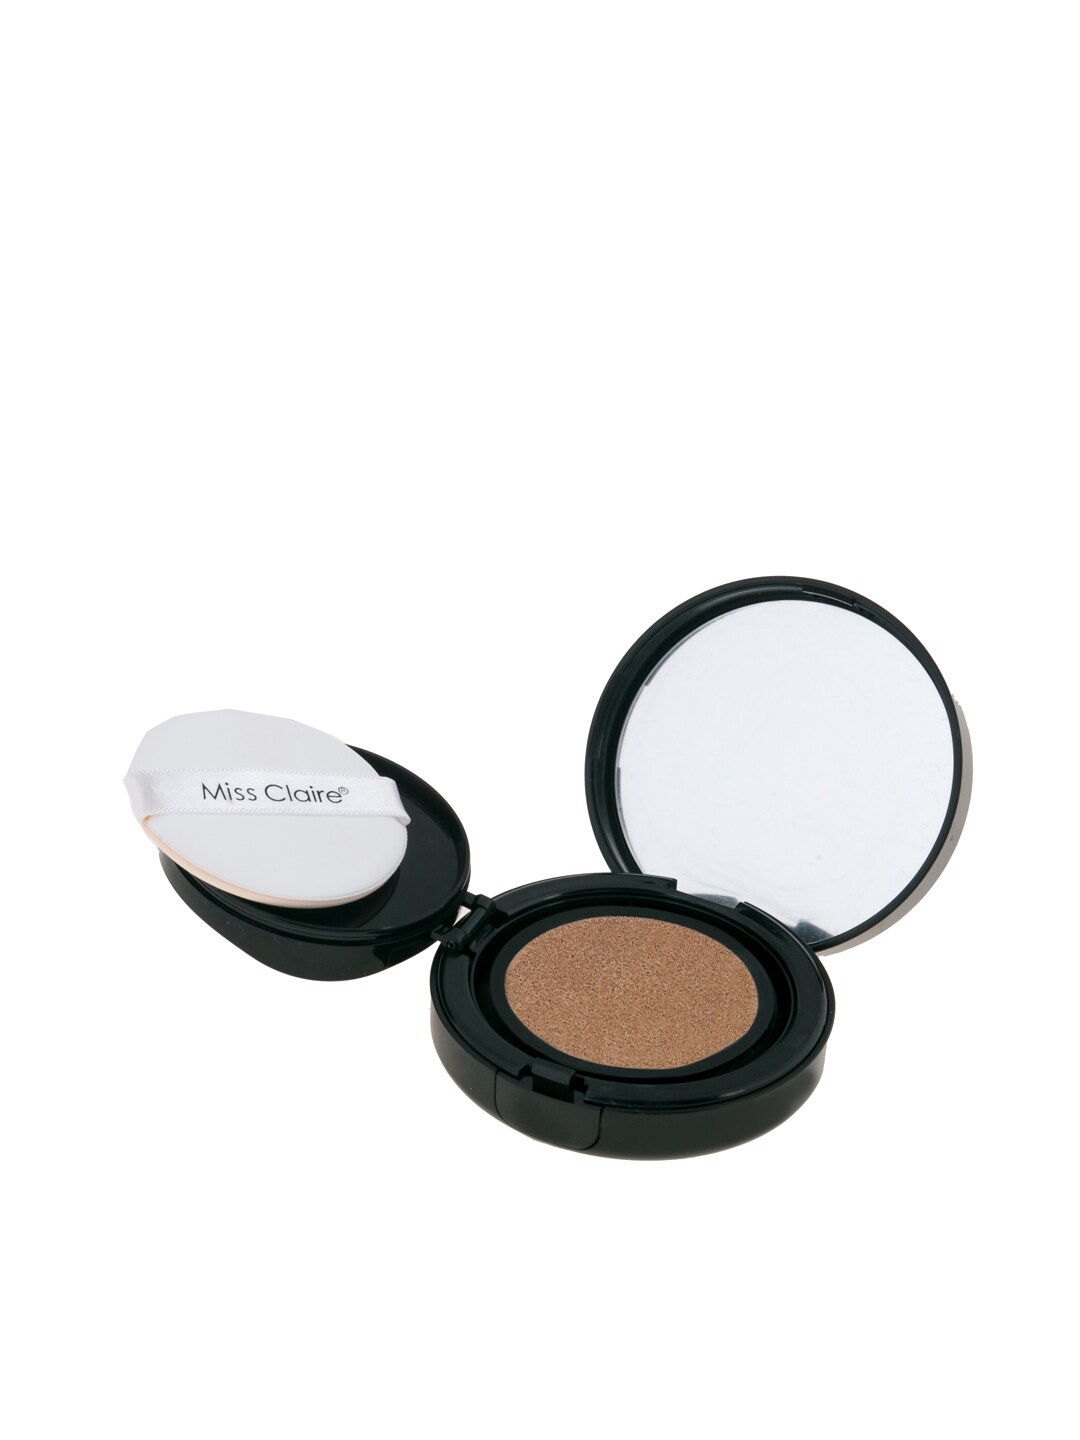 Miss Claire Magic Cover Cushion 21 Natural Beige Foundation Price in India